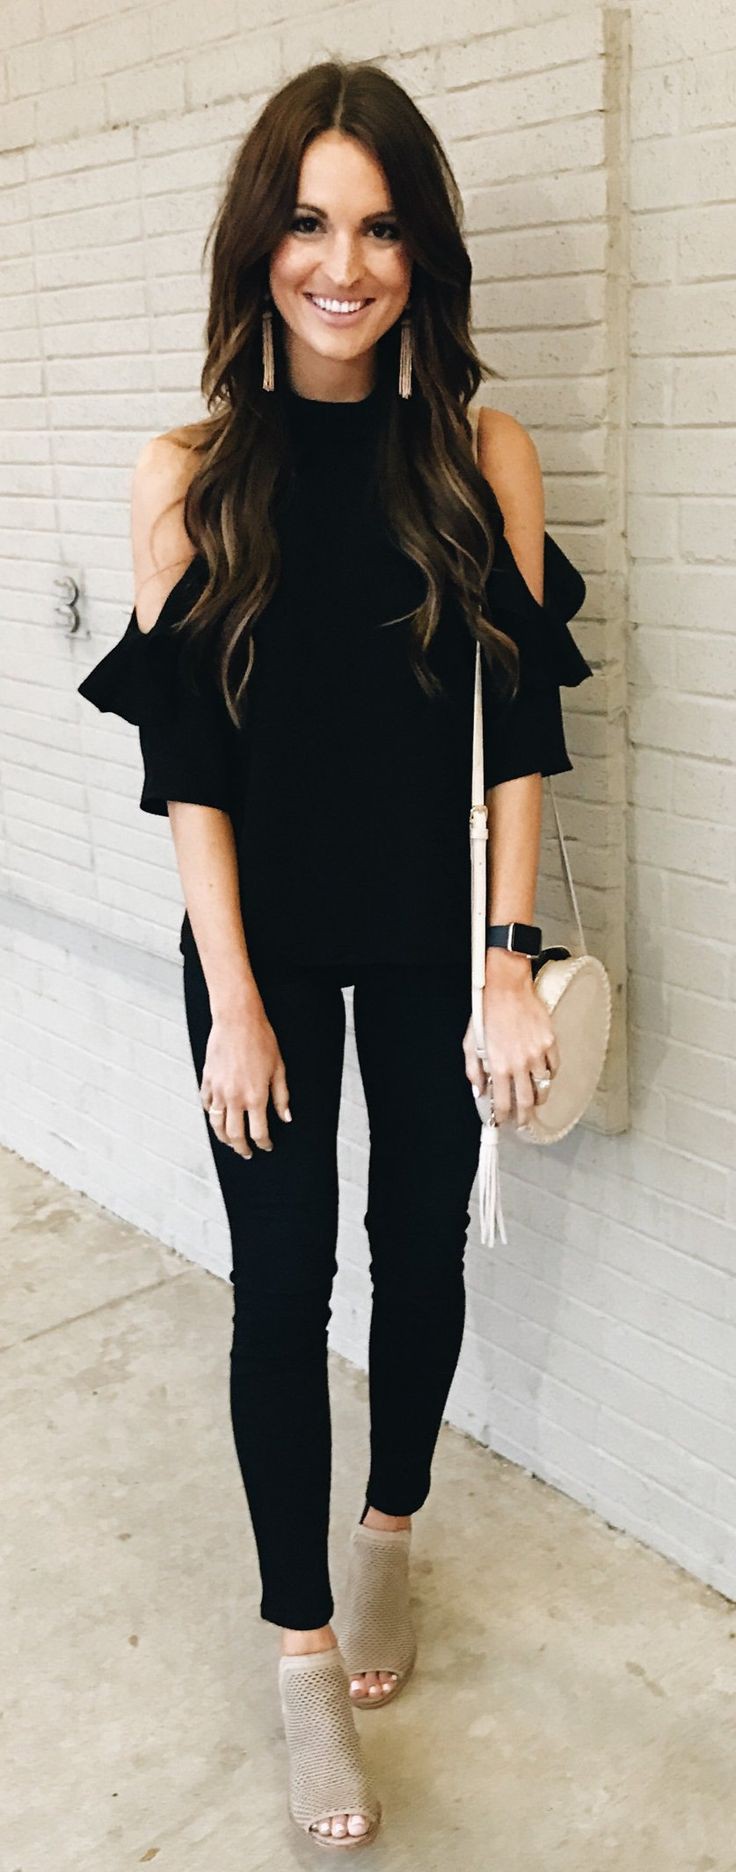 black top jeans outfit